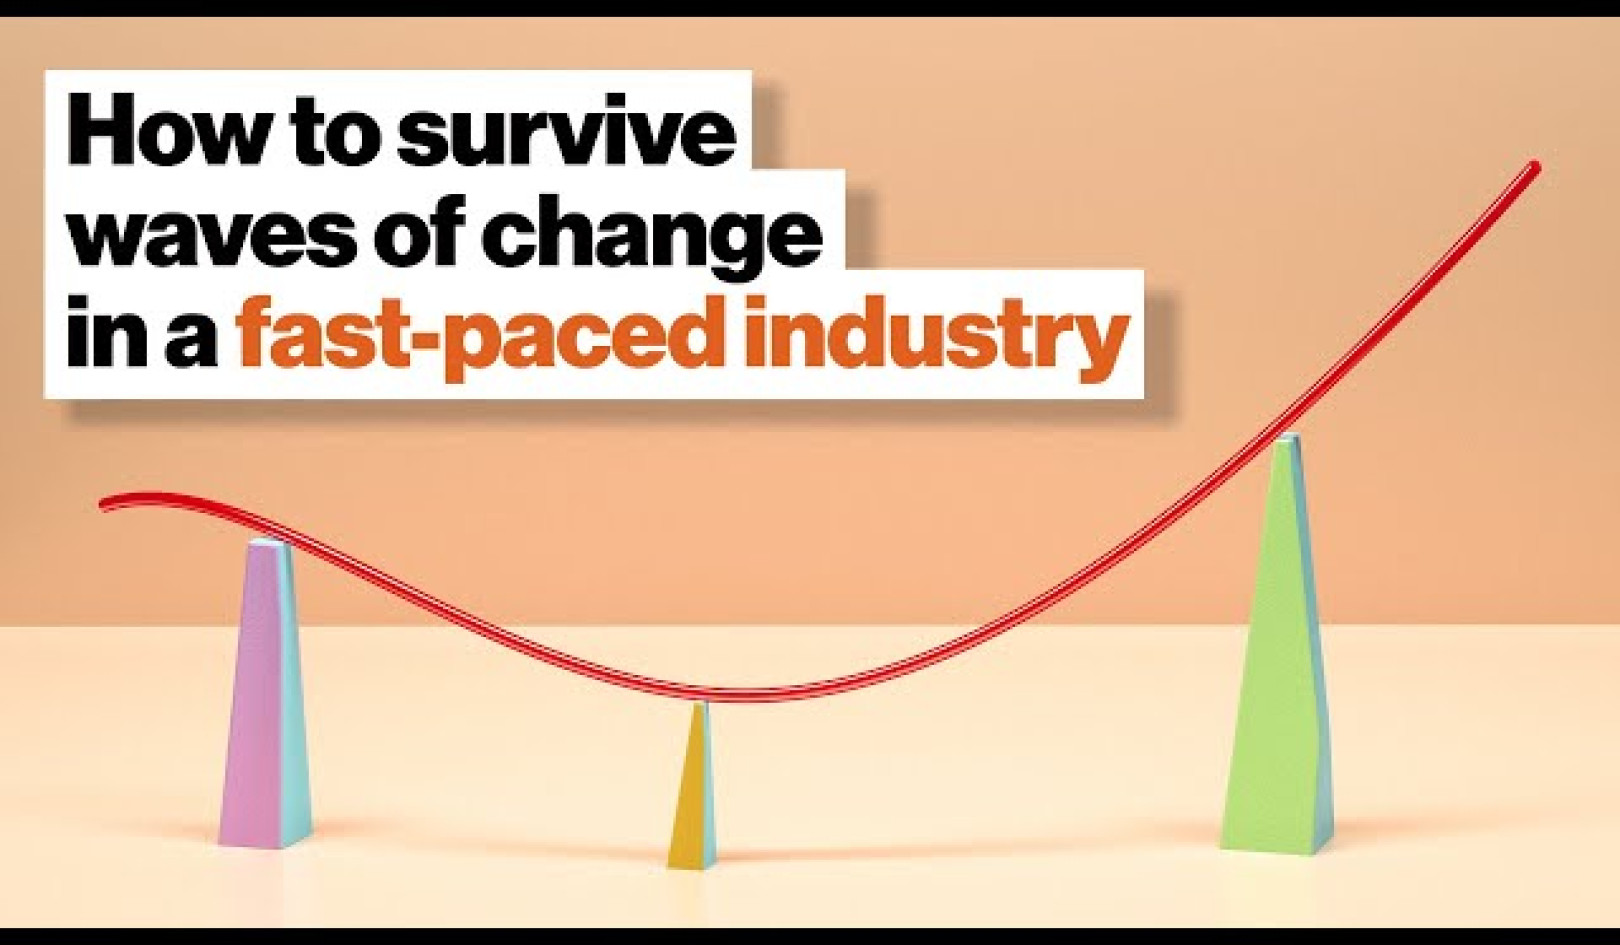 How To Survive Waves Of Change In A Fast-Paced Industry